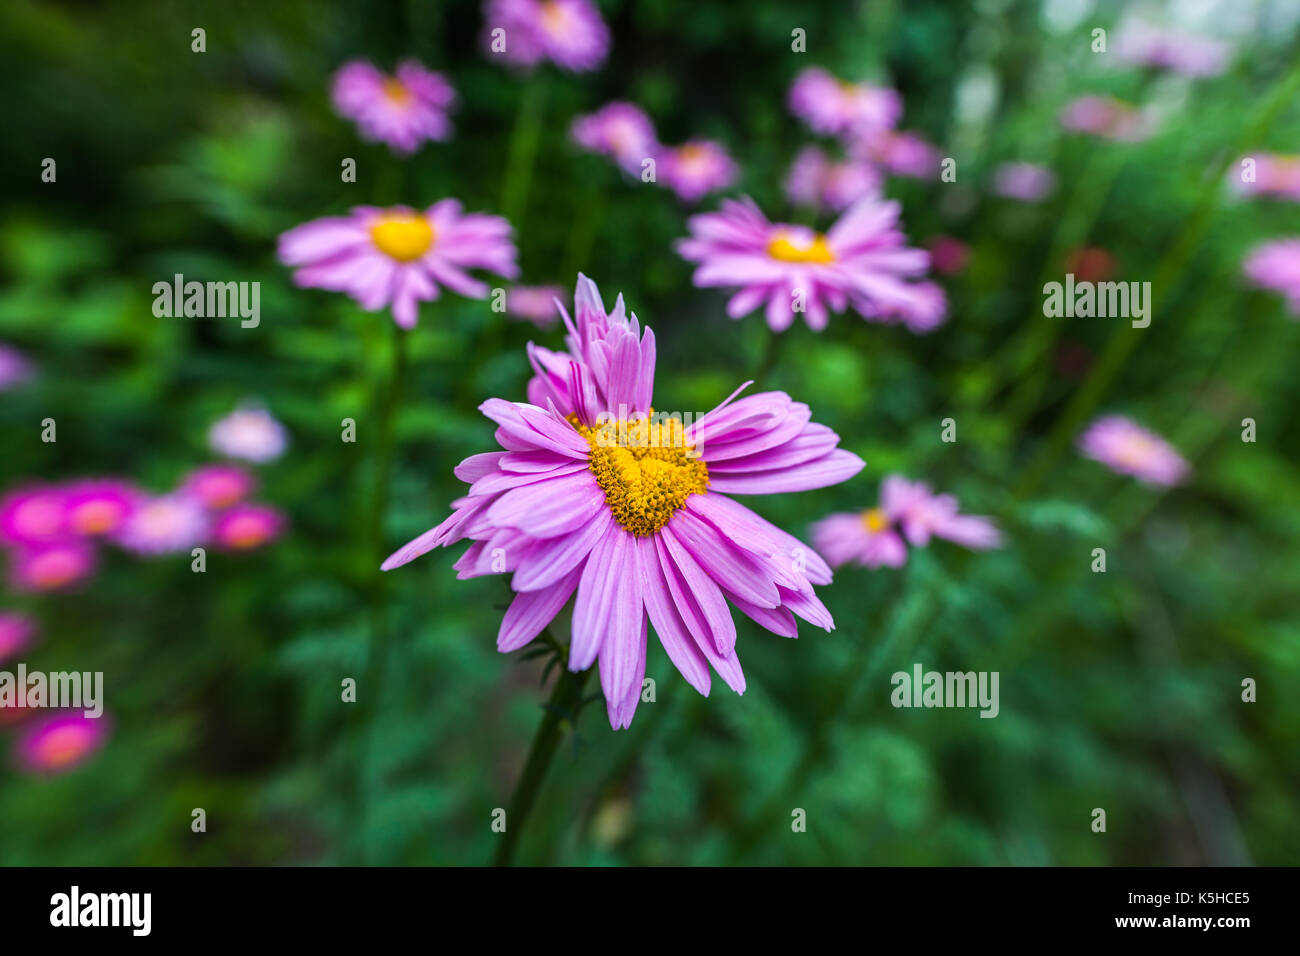 Abnormal flowers. Double headed pink daisies. Natural blurred background. Stock Photo